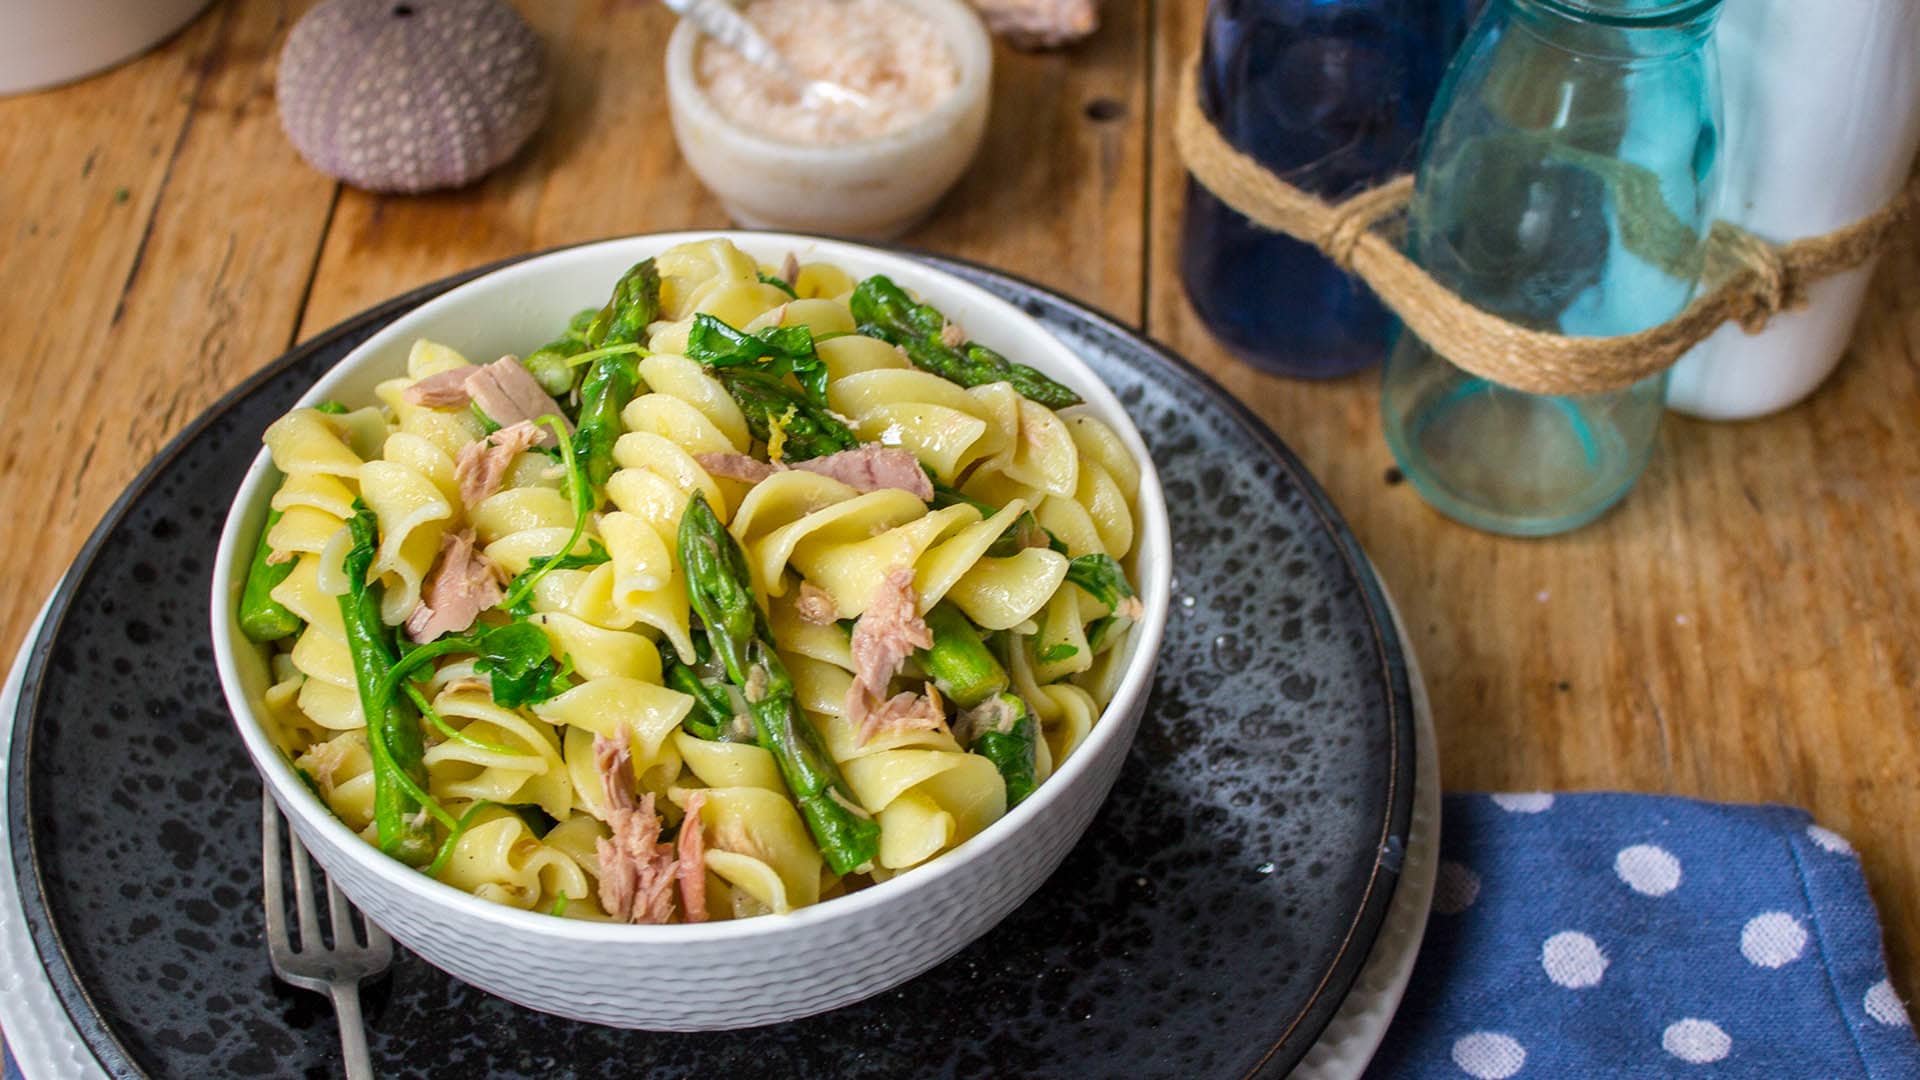 Spiral pasta with tuna and asparagus